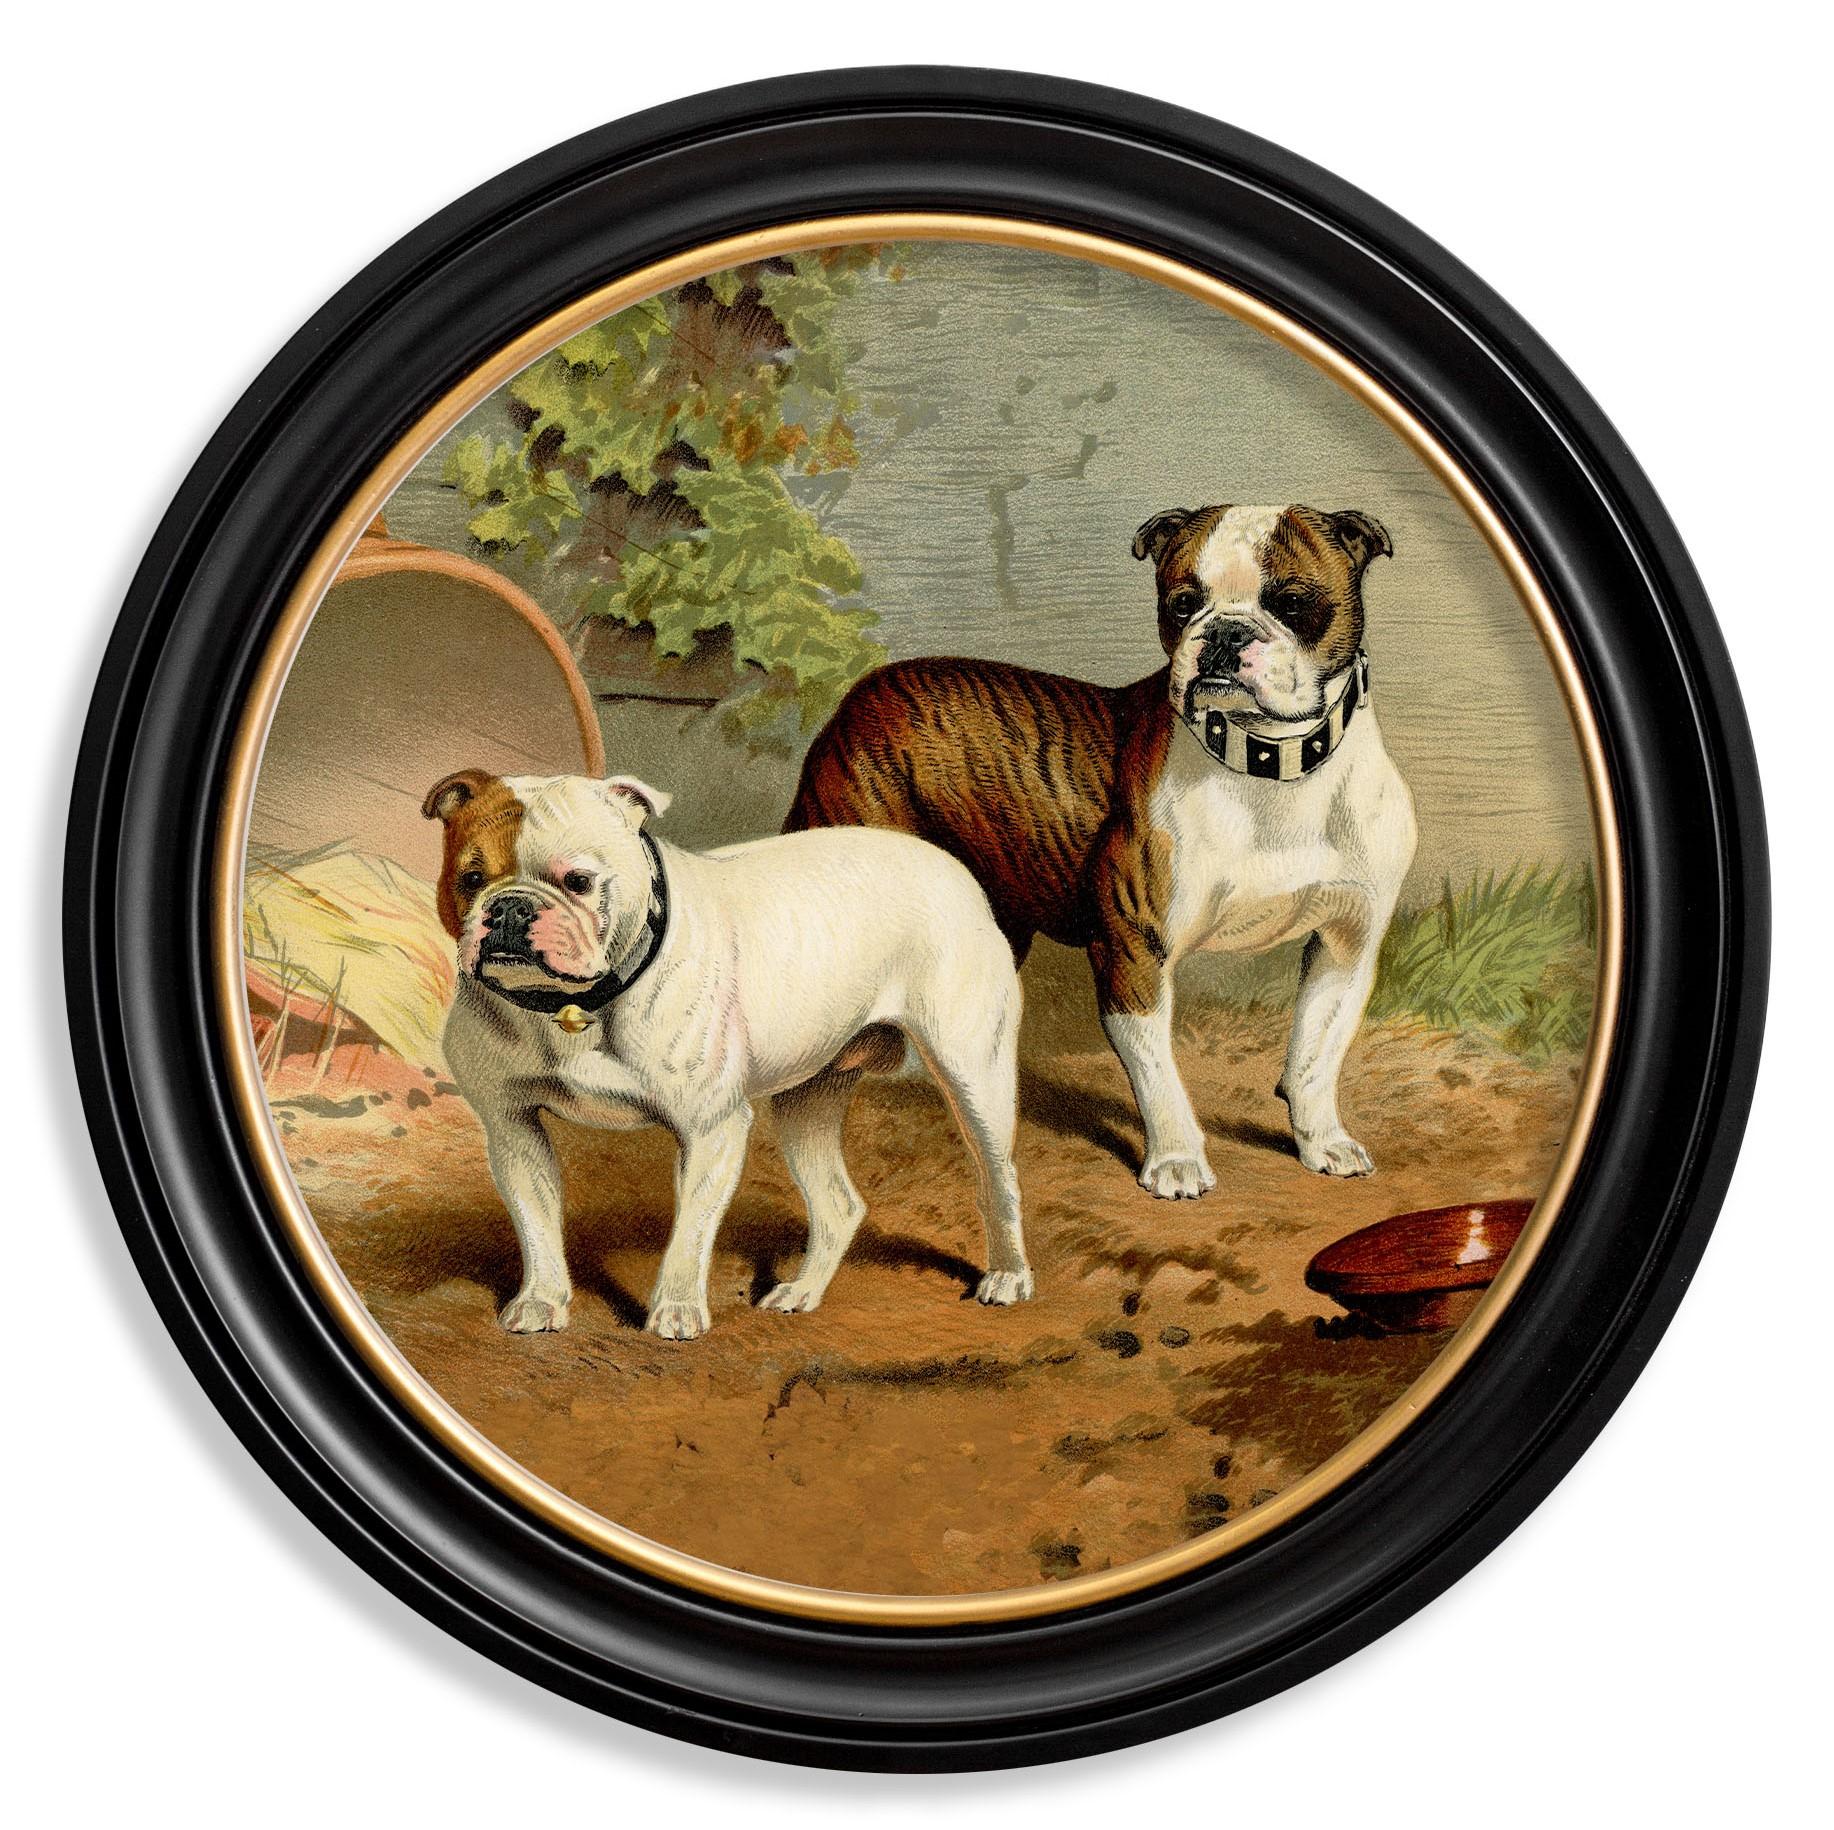 This is a digitally remastered print of Bulldogs referenced from a Victorian print originally dating to 1881.

Prints of this style were originally printed in black and white and then hand painted over the top to give them bright vibrant colours.